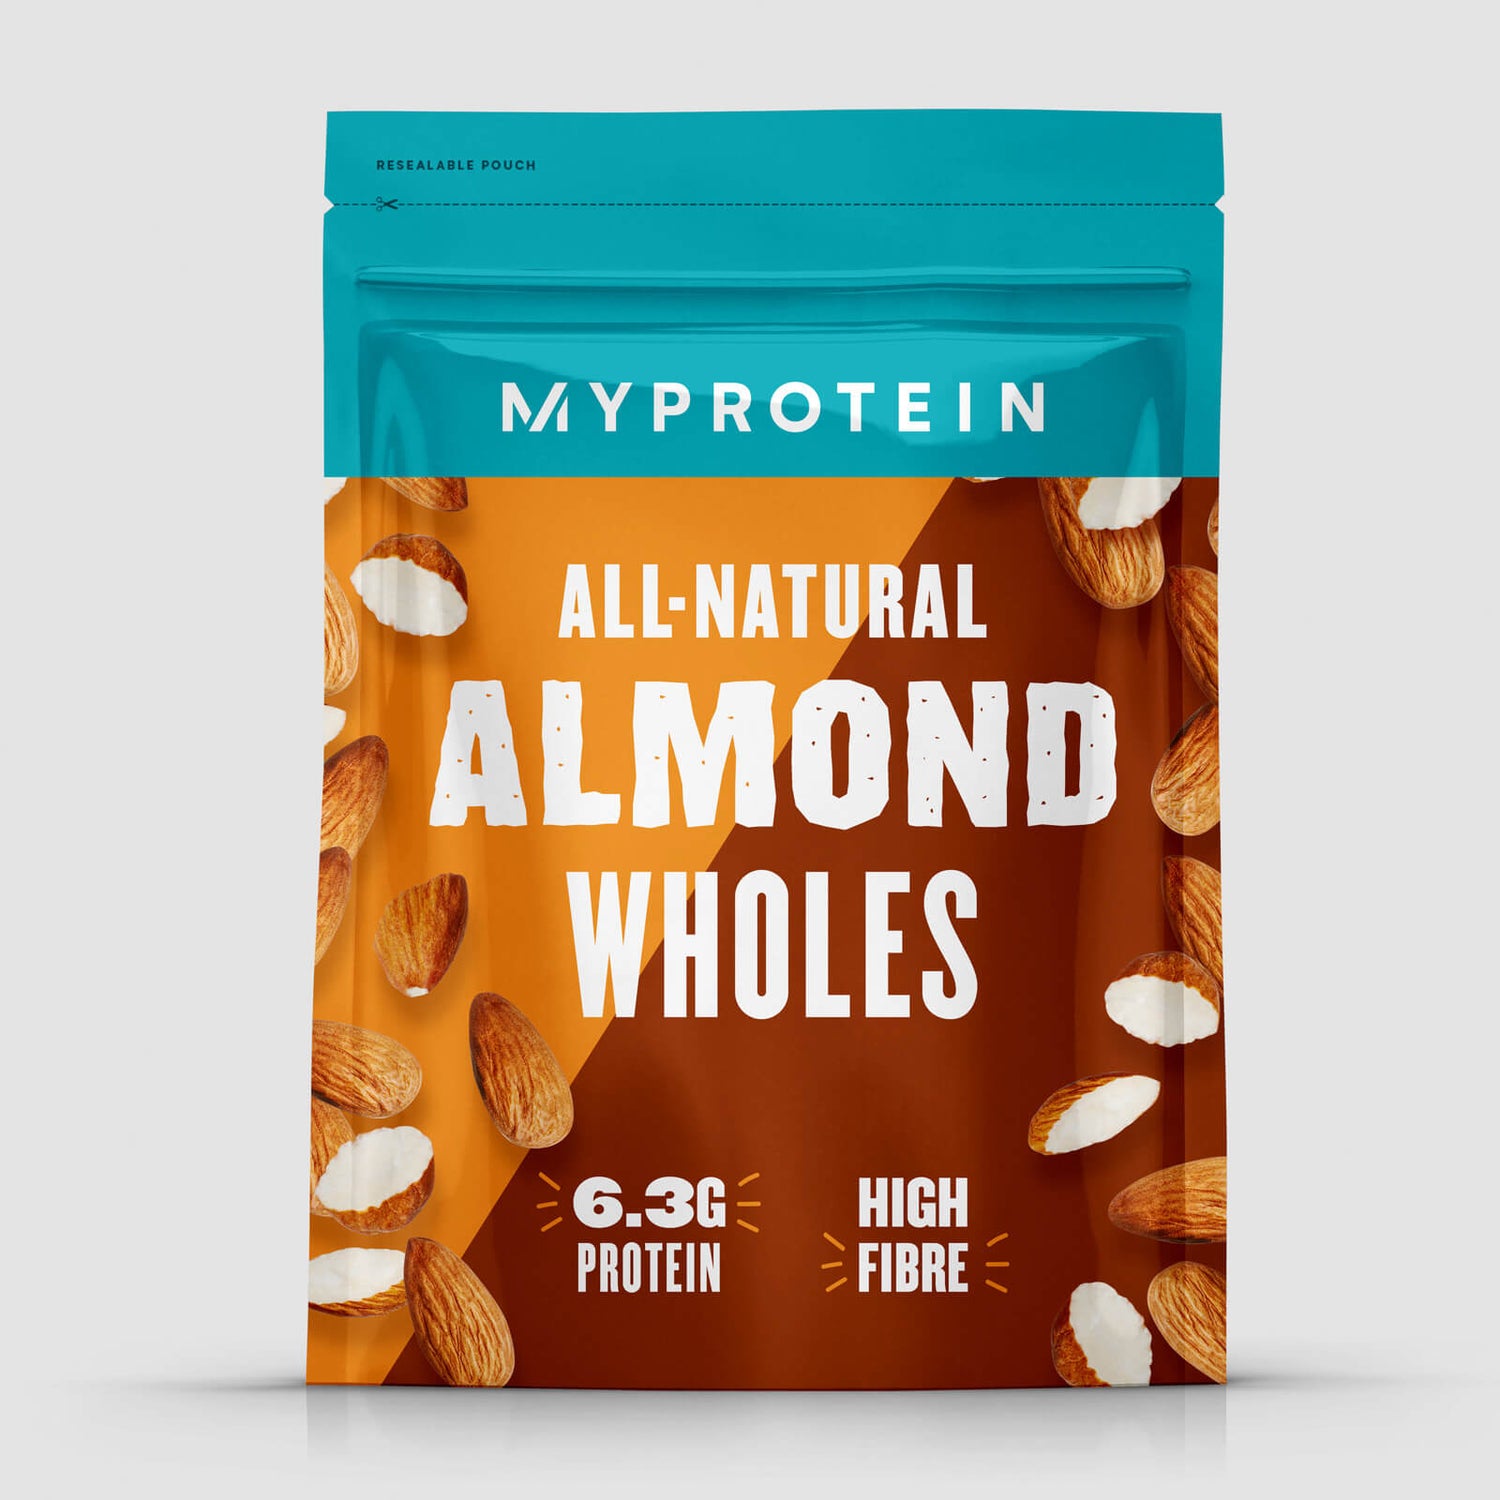 All-Natural Whole Almonds - 400g